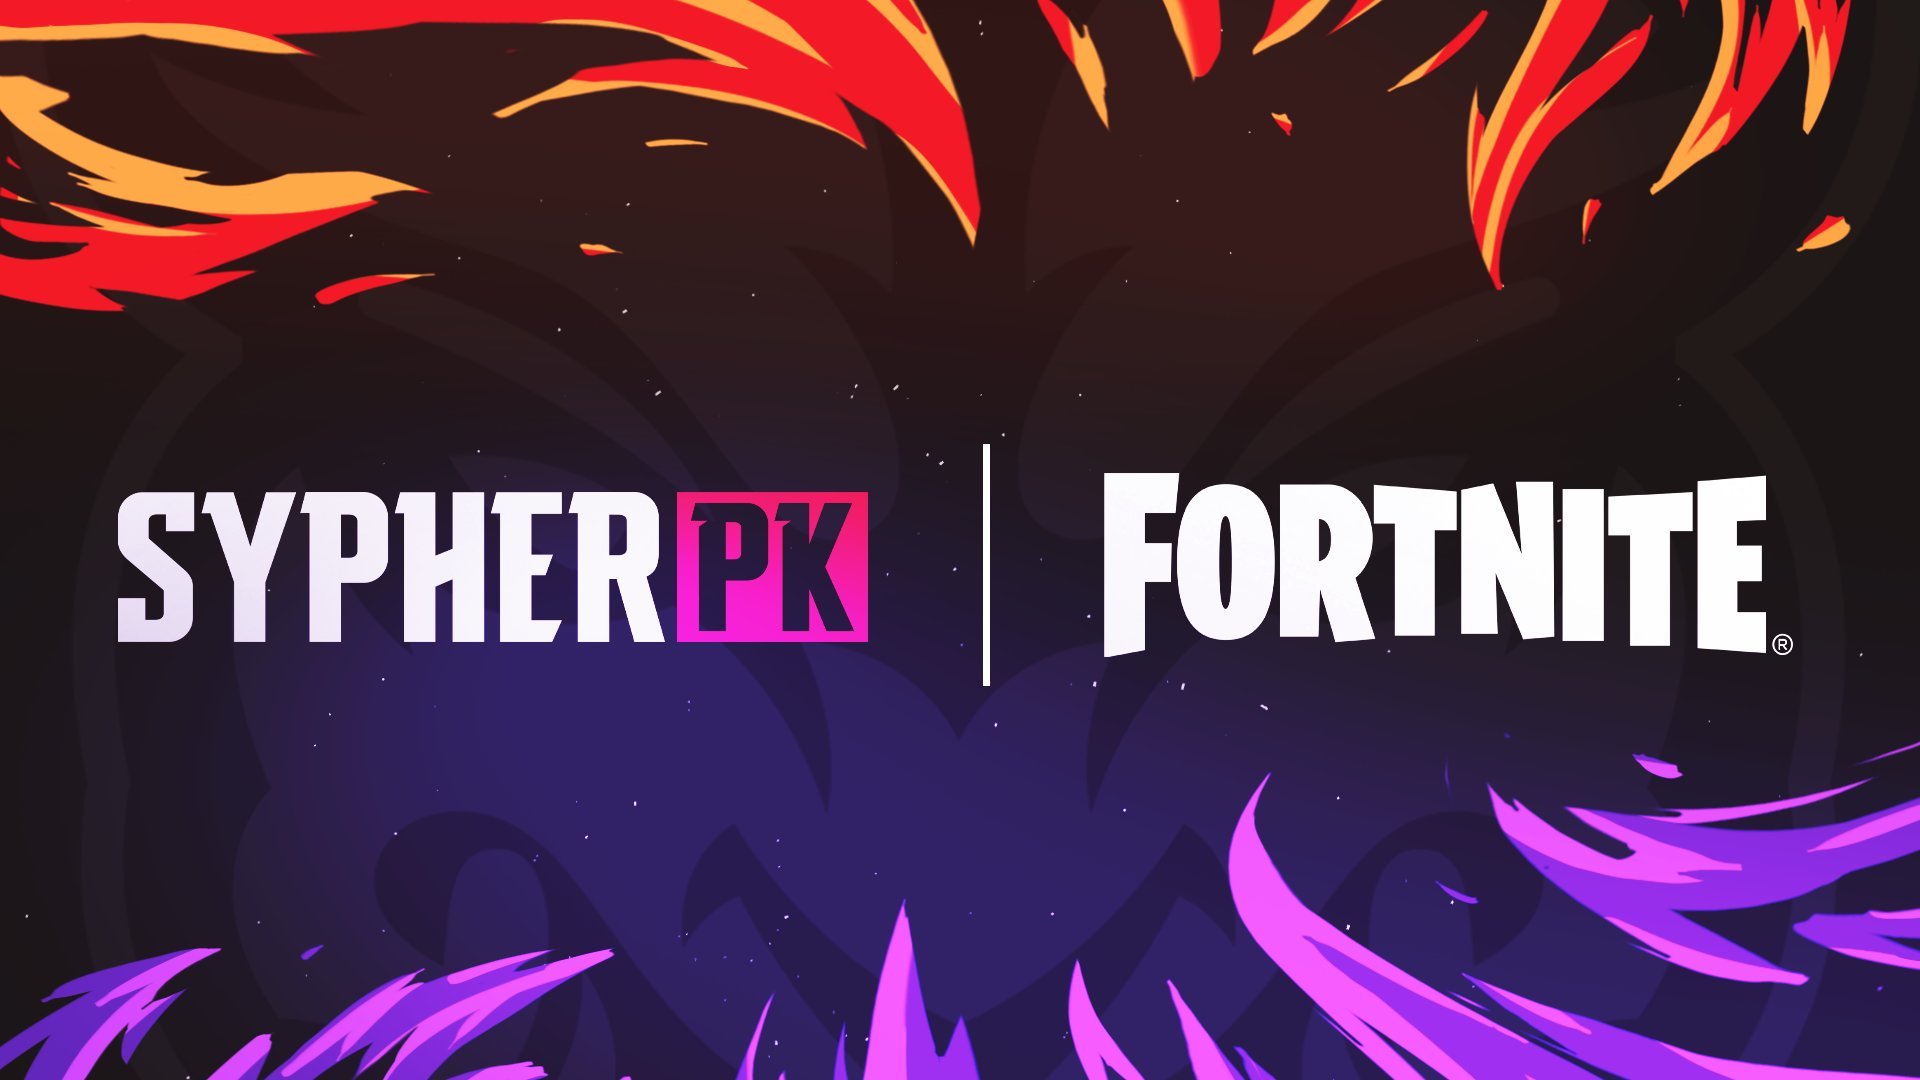 A promo image from Fortnite showing the SypherPK and Fortnite collab